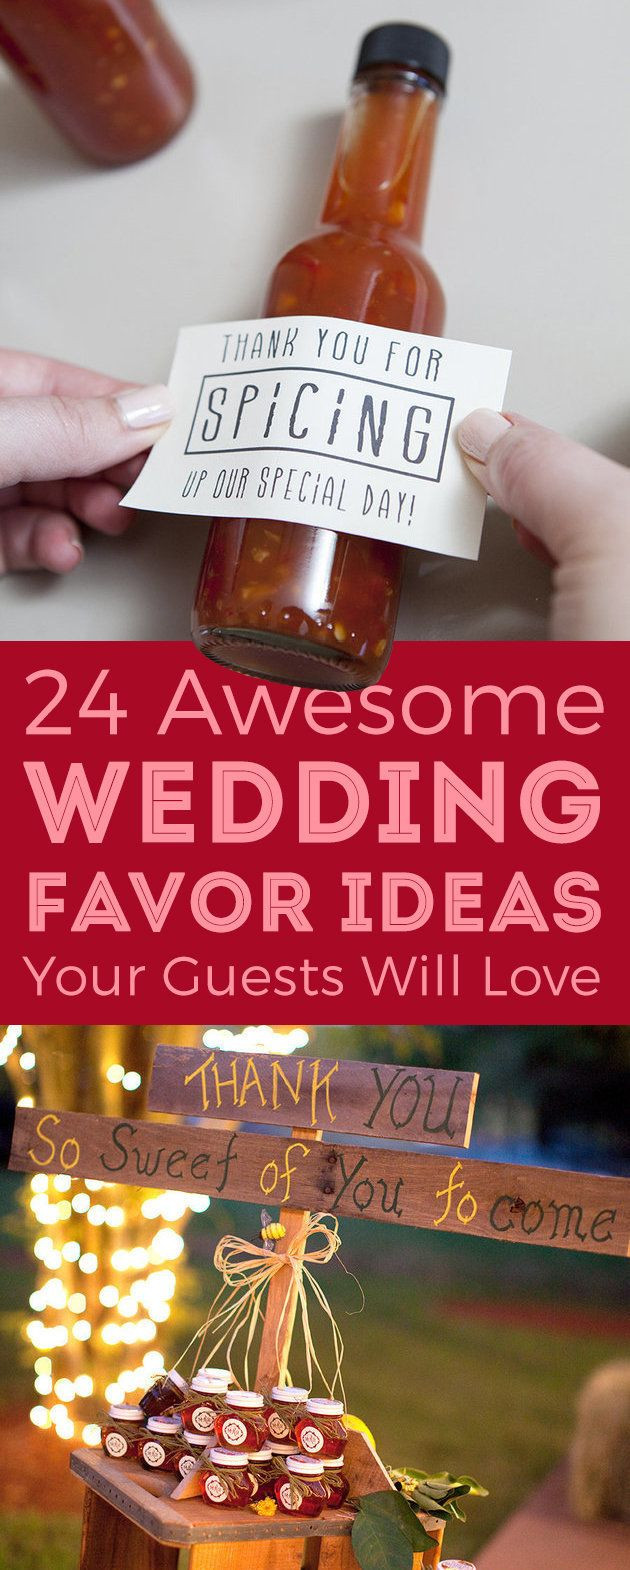 Wedding Gift Ideas For Young Couple
 24 Wedding Favor Ideas That Don t Suck